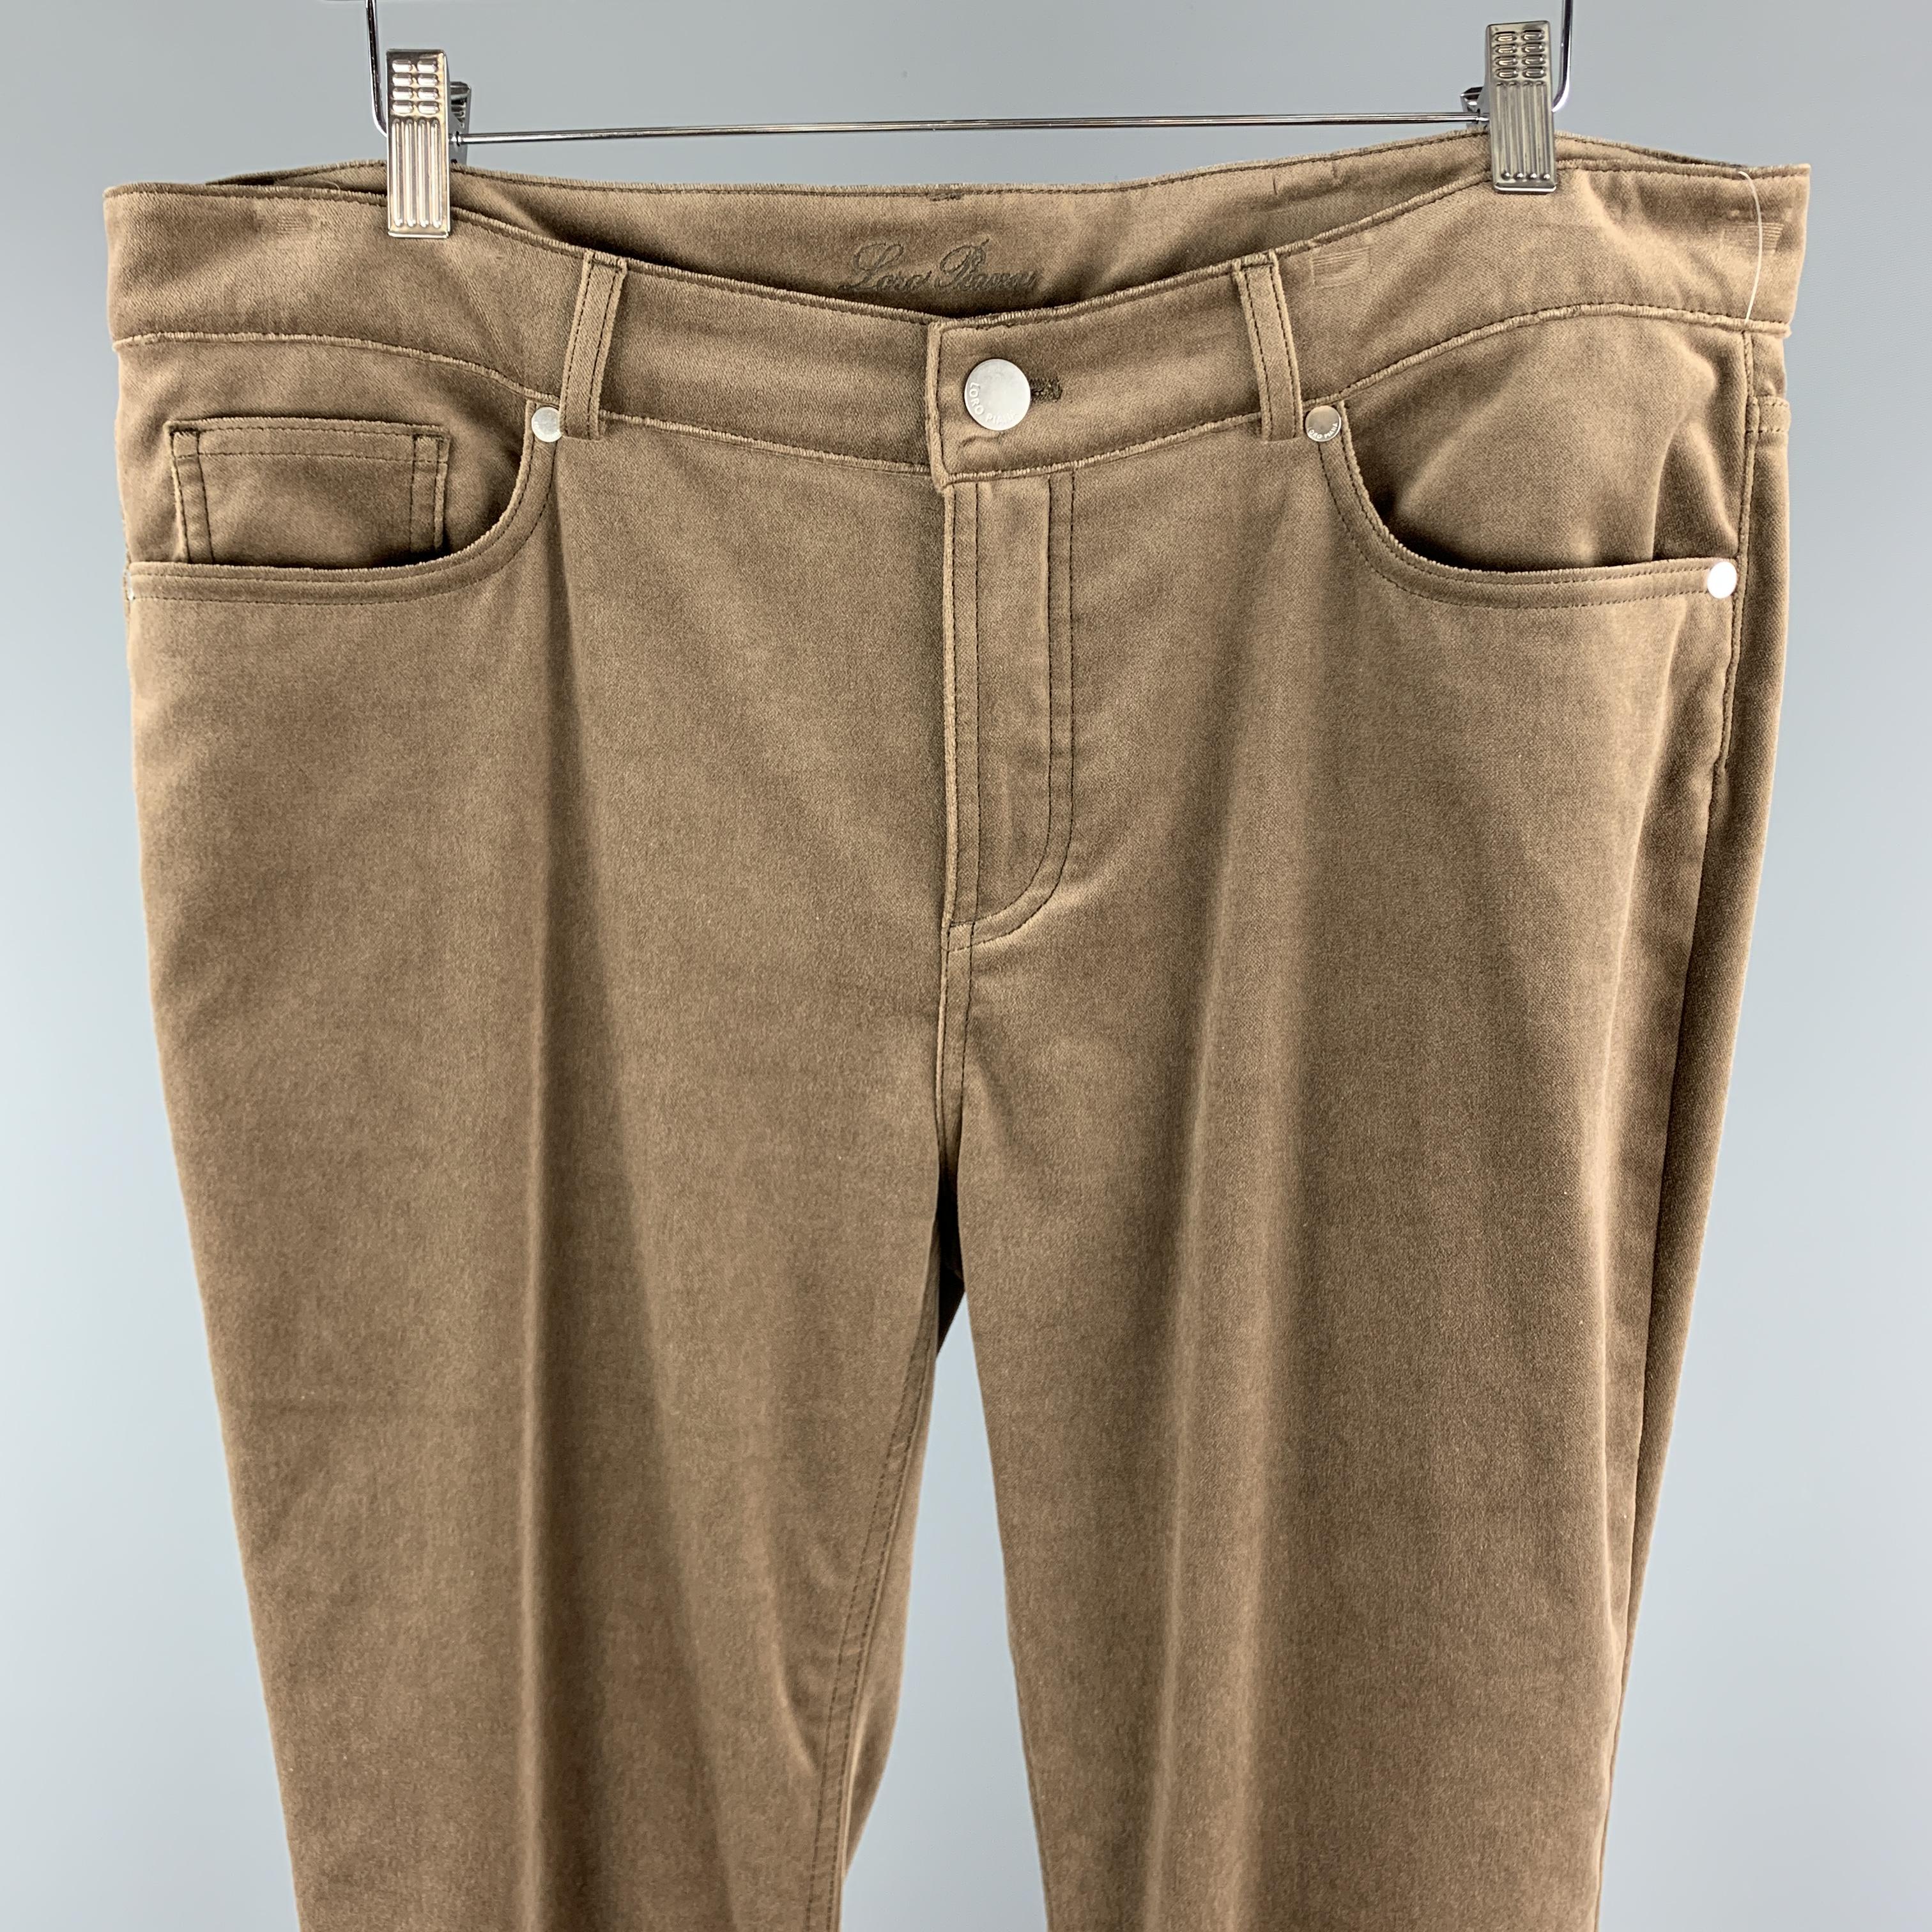 LORO PIANA  Dress Pants comes in a taupe solid velvet cotton / elastane material, with a flat front, a five pockets style, and silver tone metal hardware. Made in Italy. 

Excellent Pre-Owned Condition.
Marked: IT 48

Measurements:

Waist: 38 in.